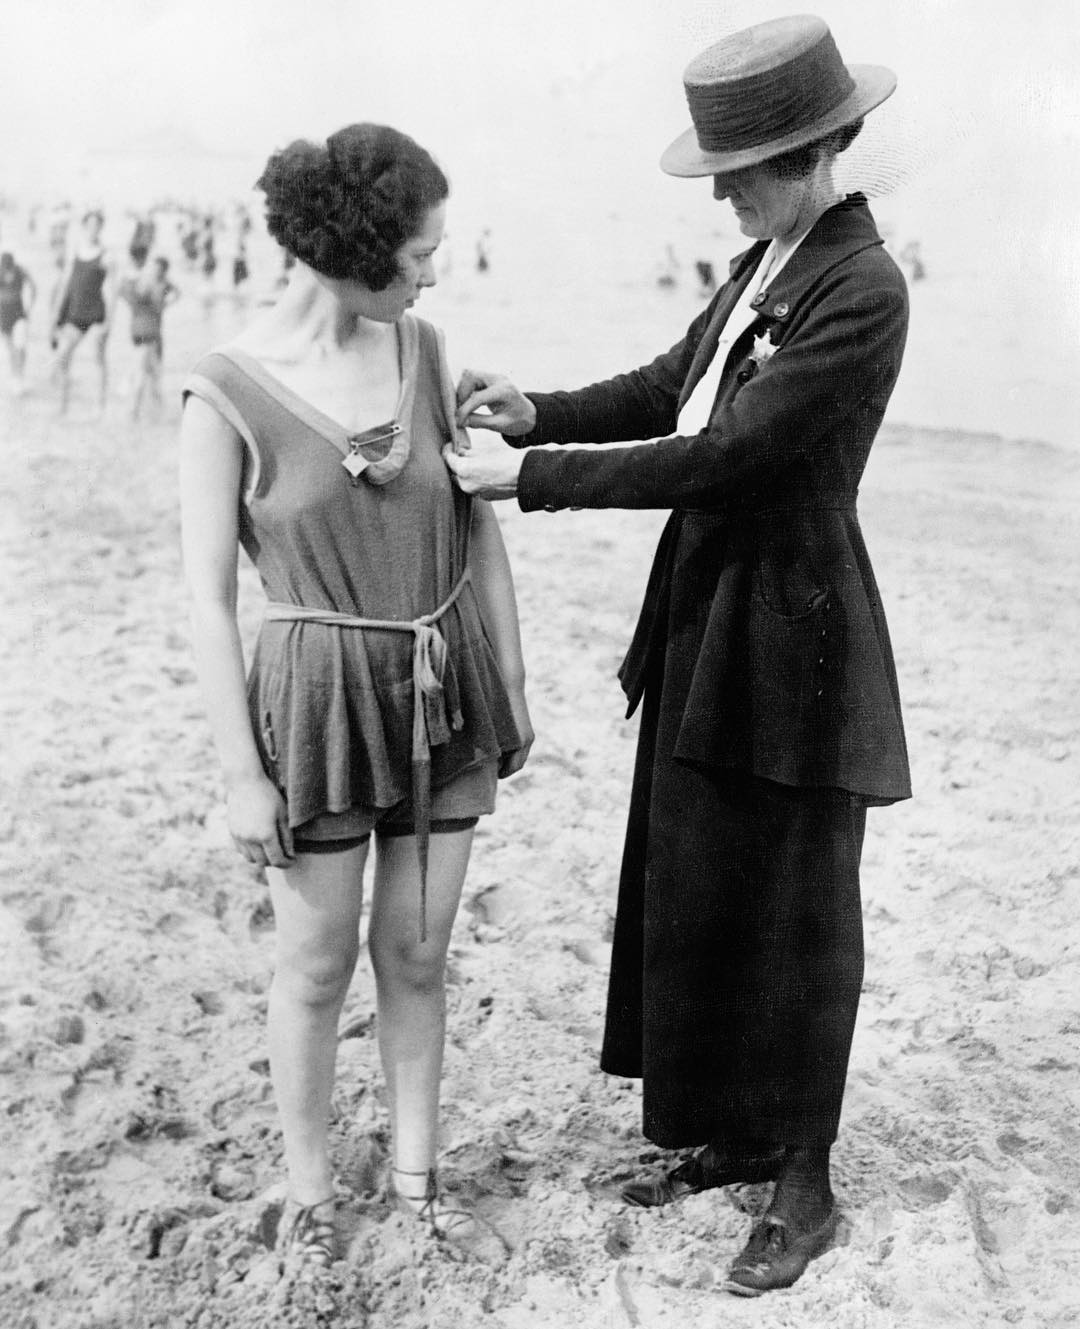 A Chicago policewoman checking for violations of the bathing suit-length laws 1921